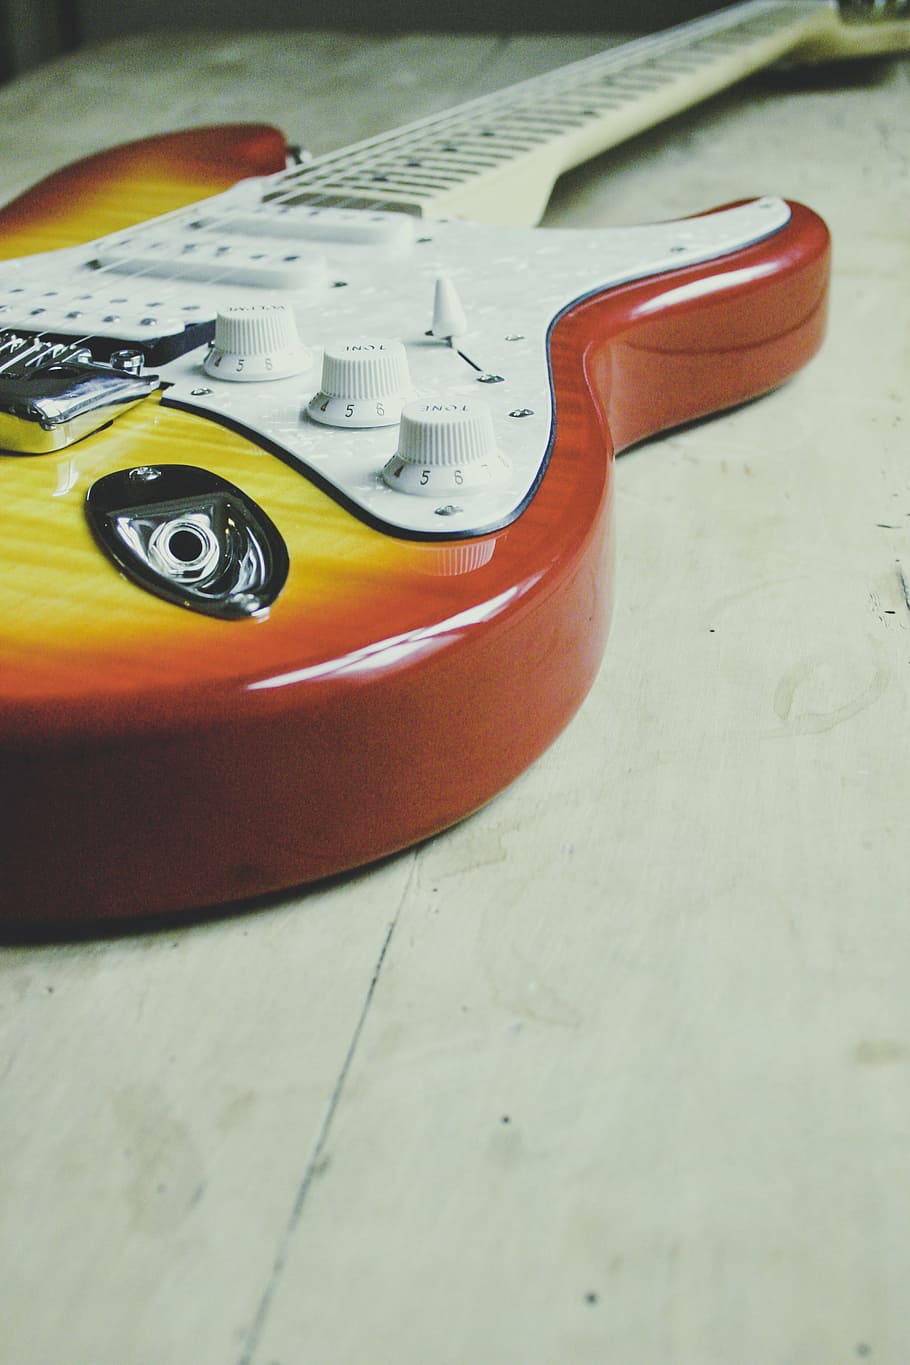 red, yellow, electric, guitar, white, surface, strings, musical, instrument, glossy